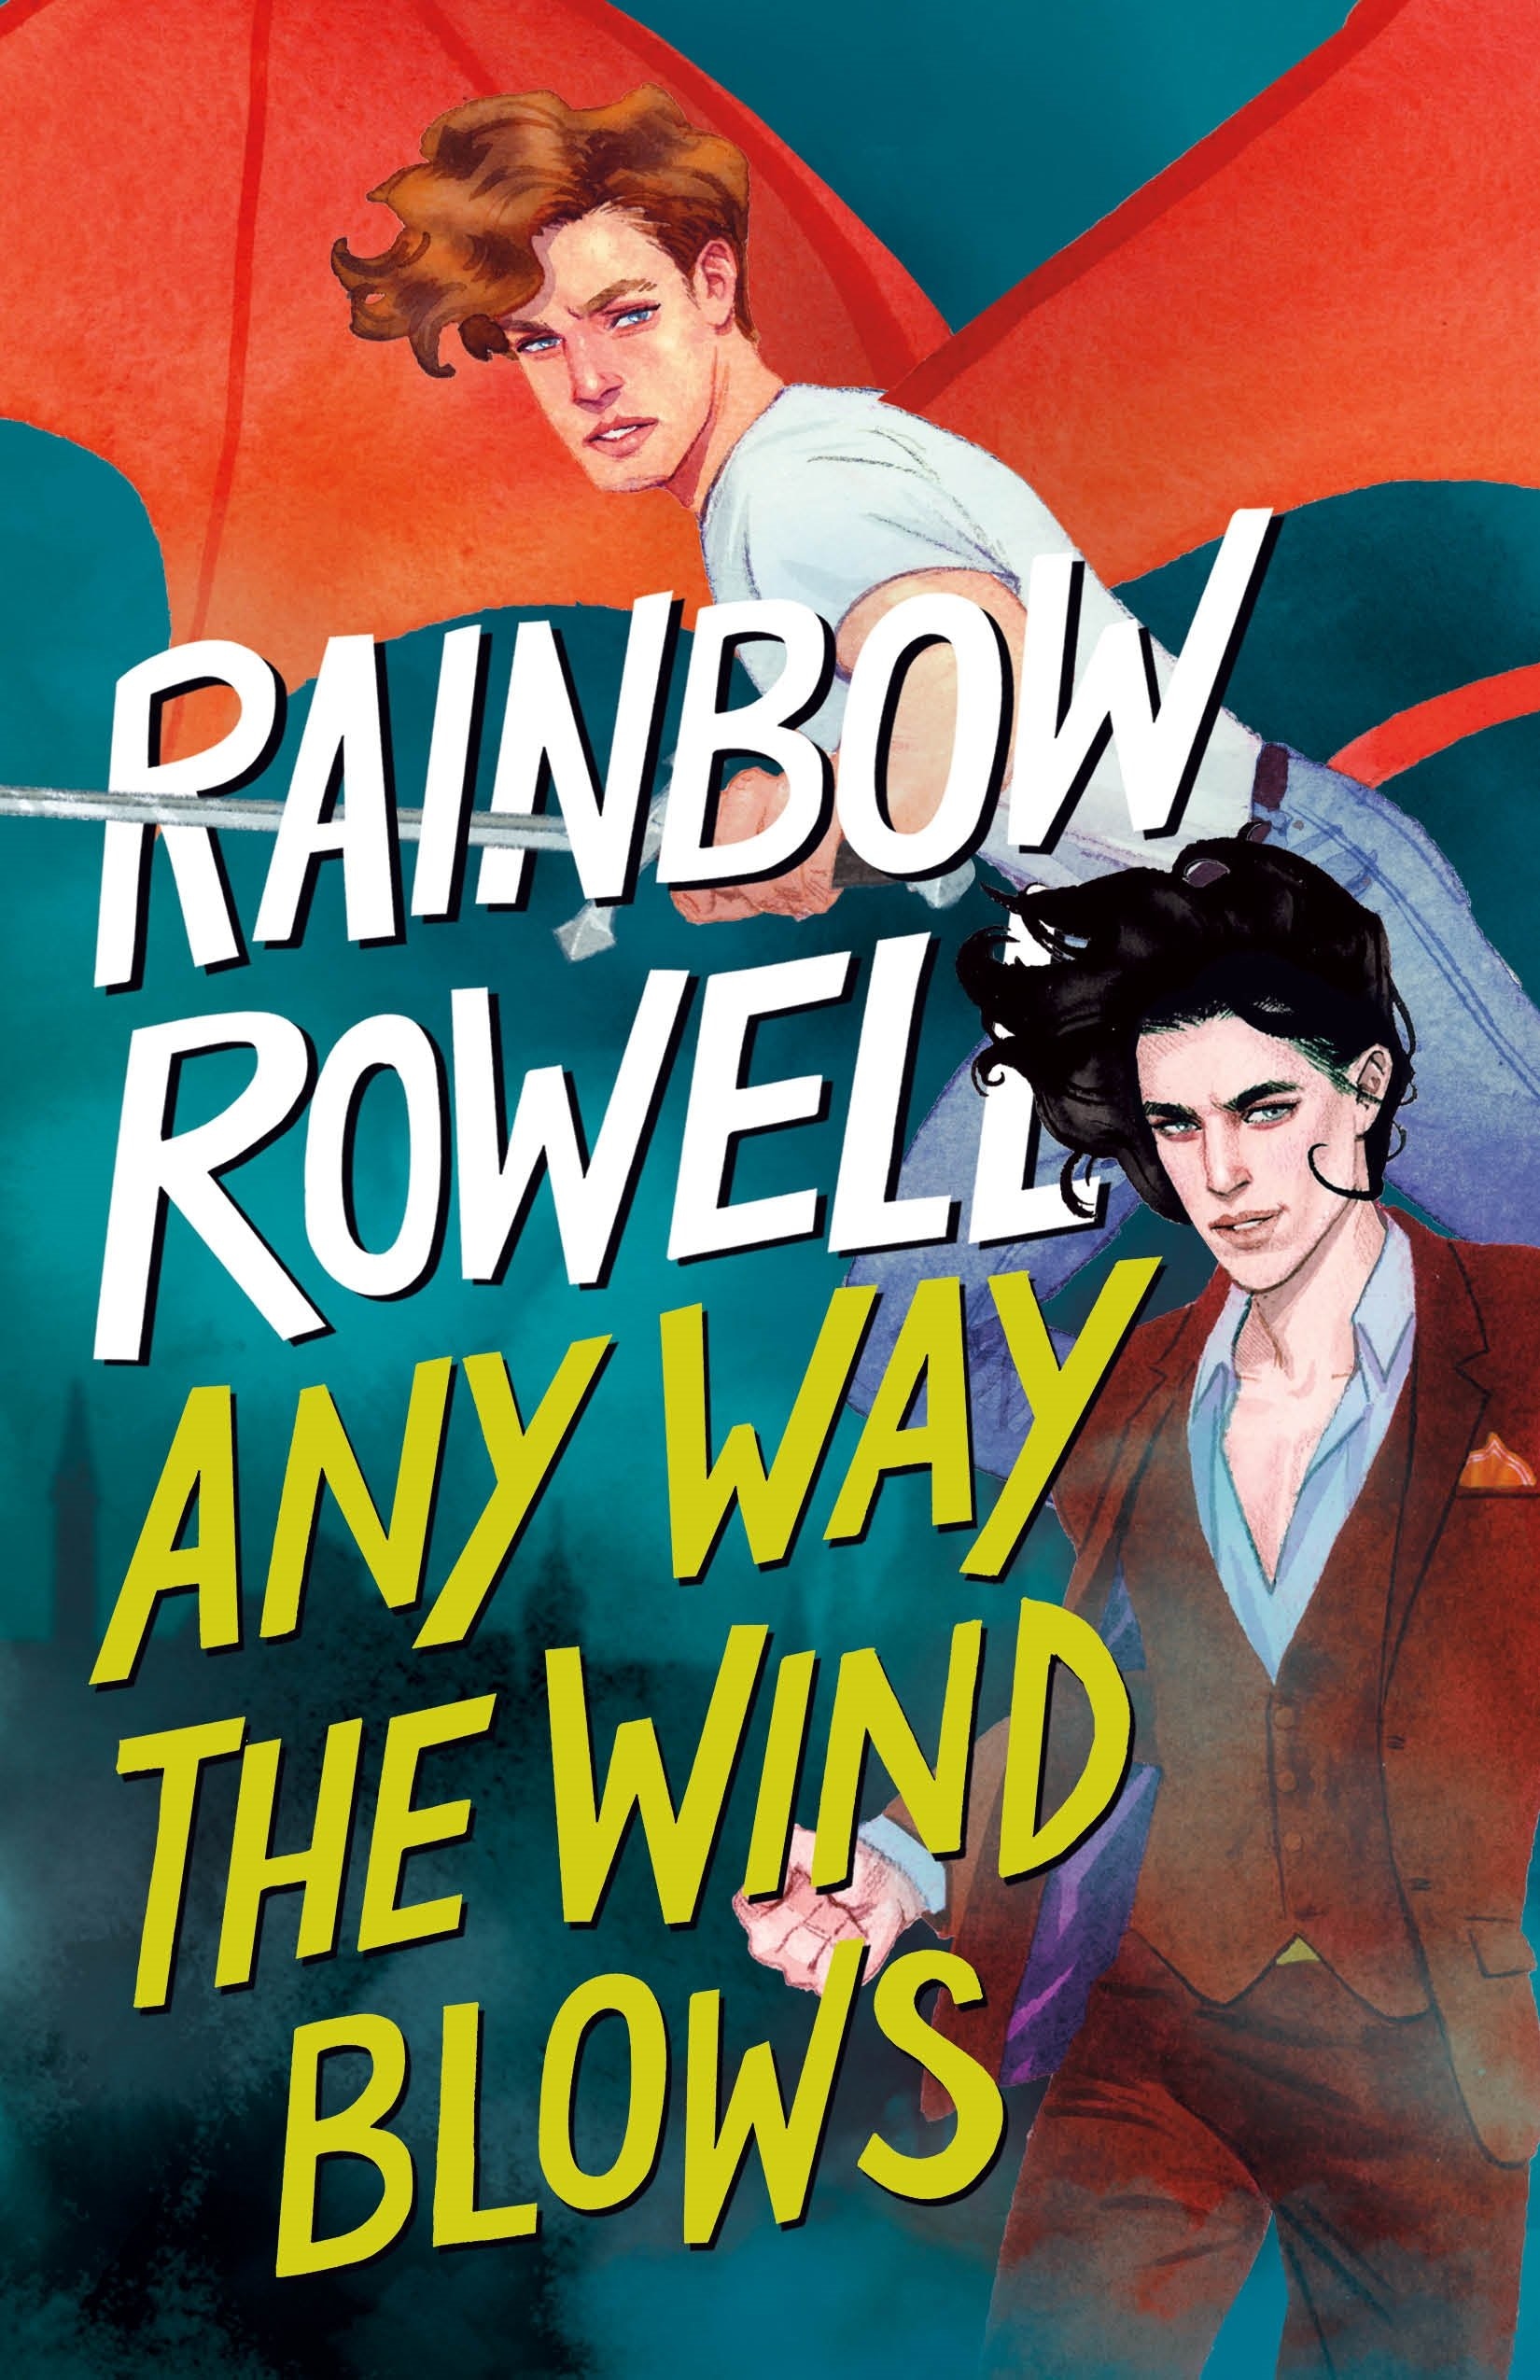 Book “Any Way the Wind Blows” by Rainbow Rowell — July 6, 2021